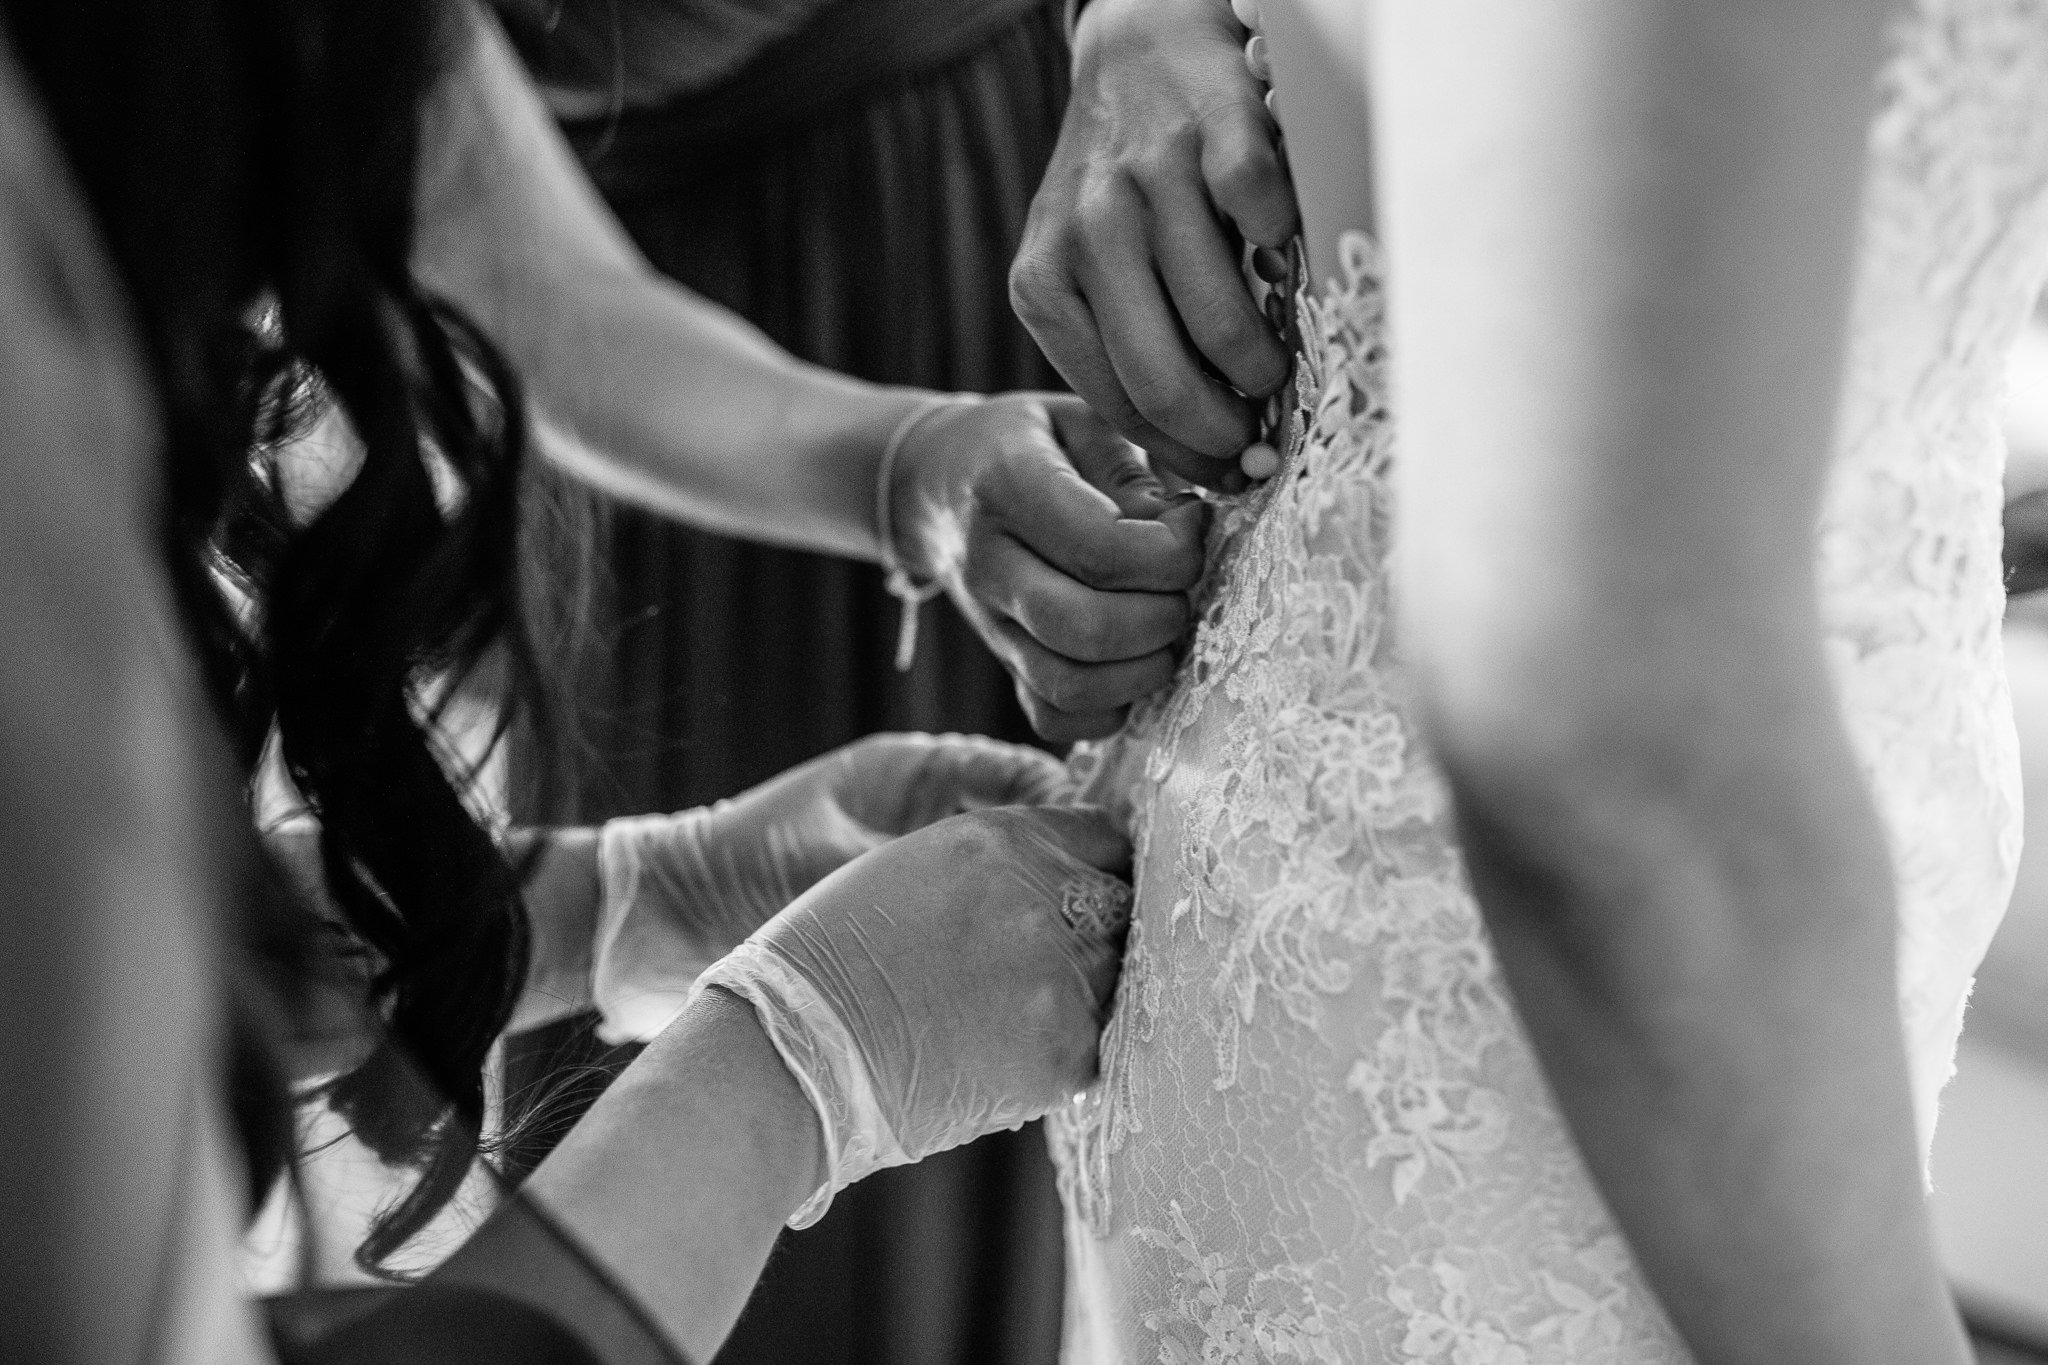  Hands securing the back of the bride’s dress 